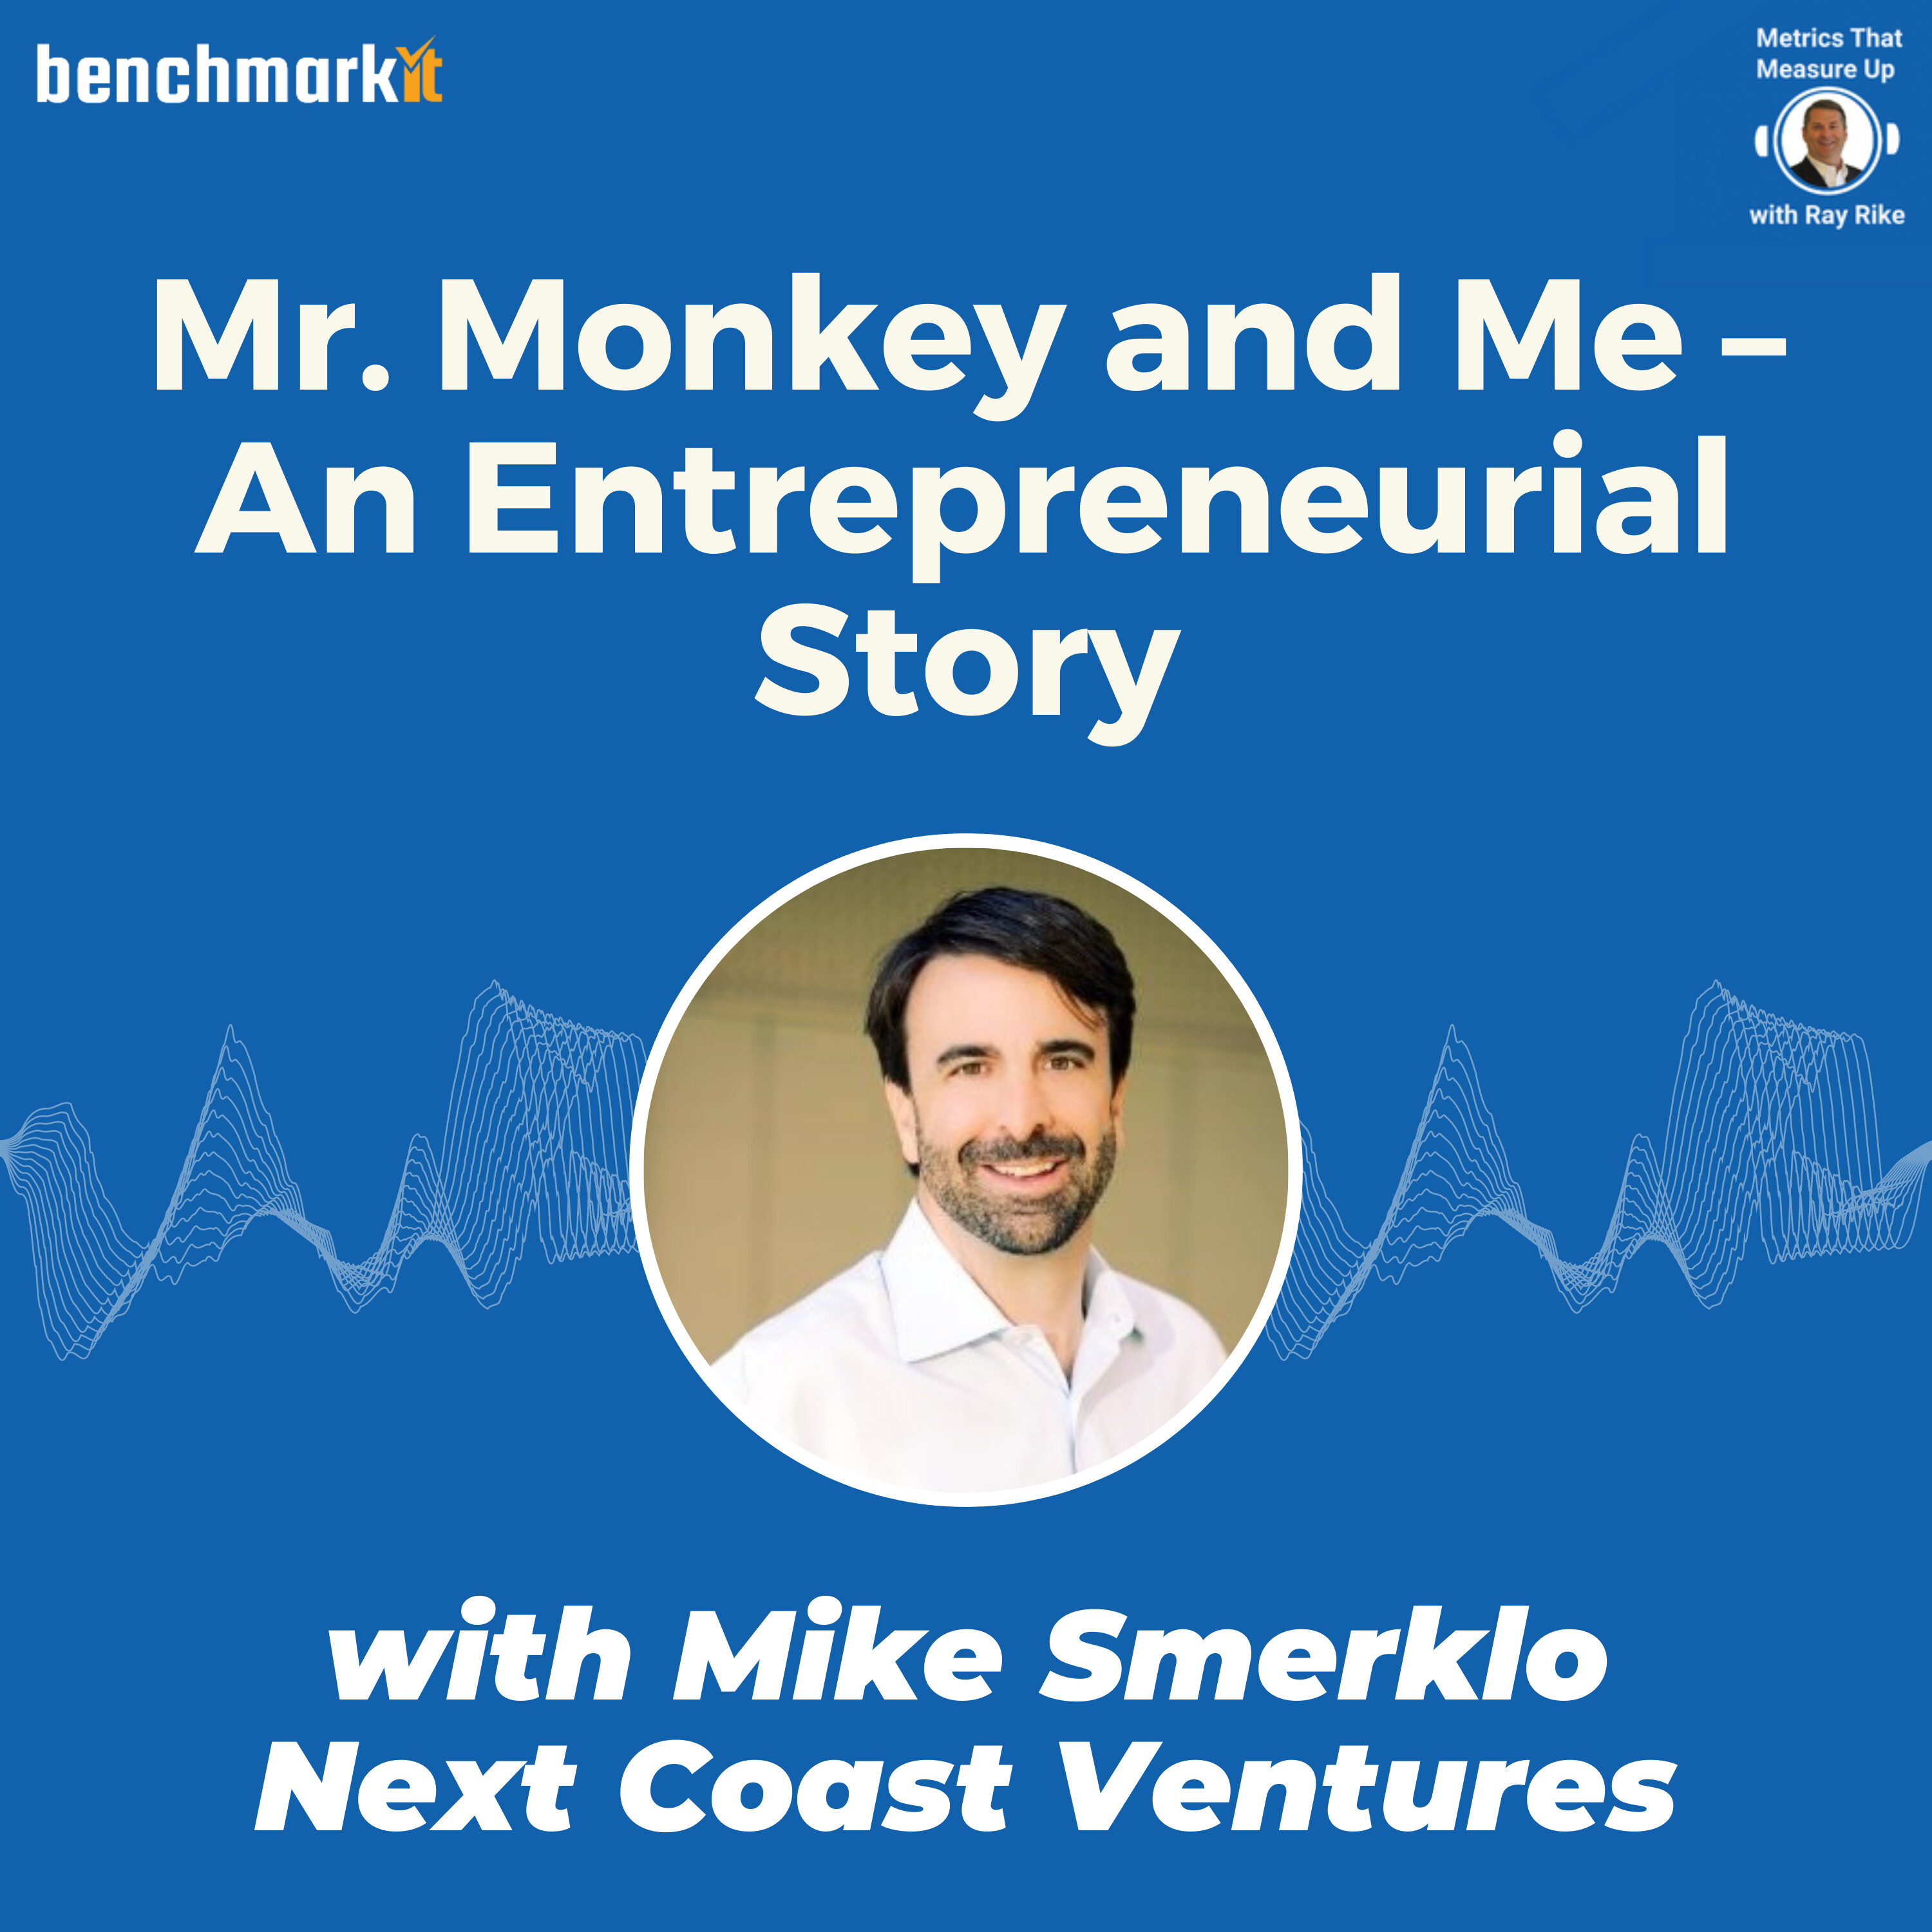 An Entrepreneur's Inner Voice of Doubt - with Mike Smerklo, Next Coast Ventures and Mr. Monkey and Me author